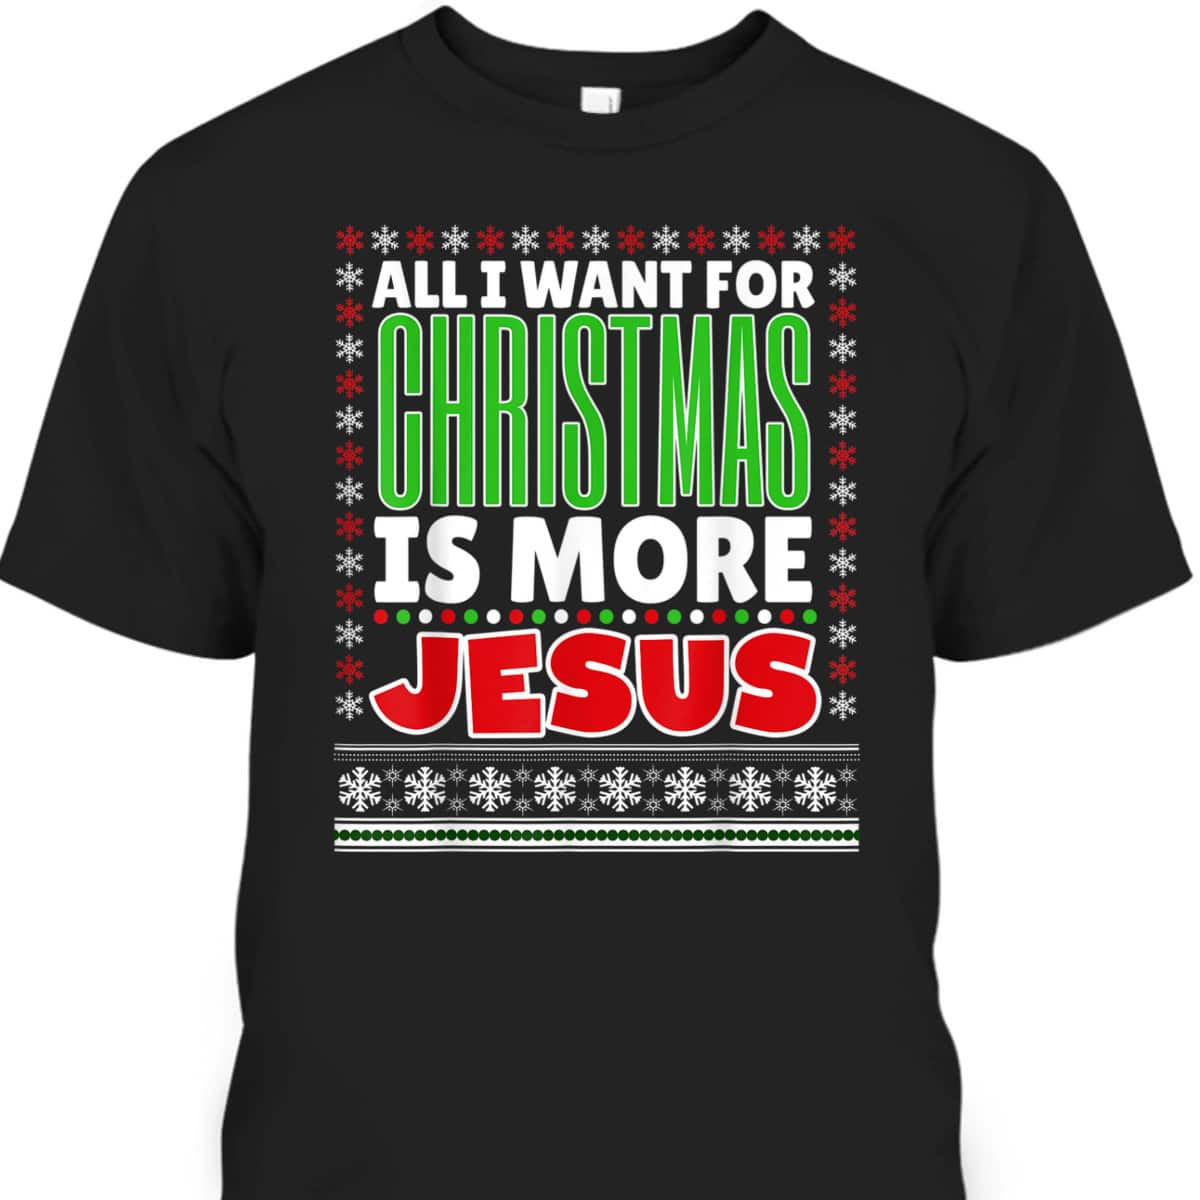 All I Want For Christmas Is More Jesus Christmas T-Shirt